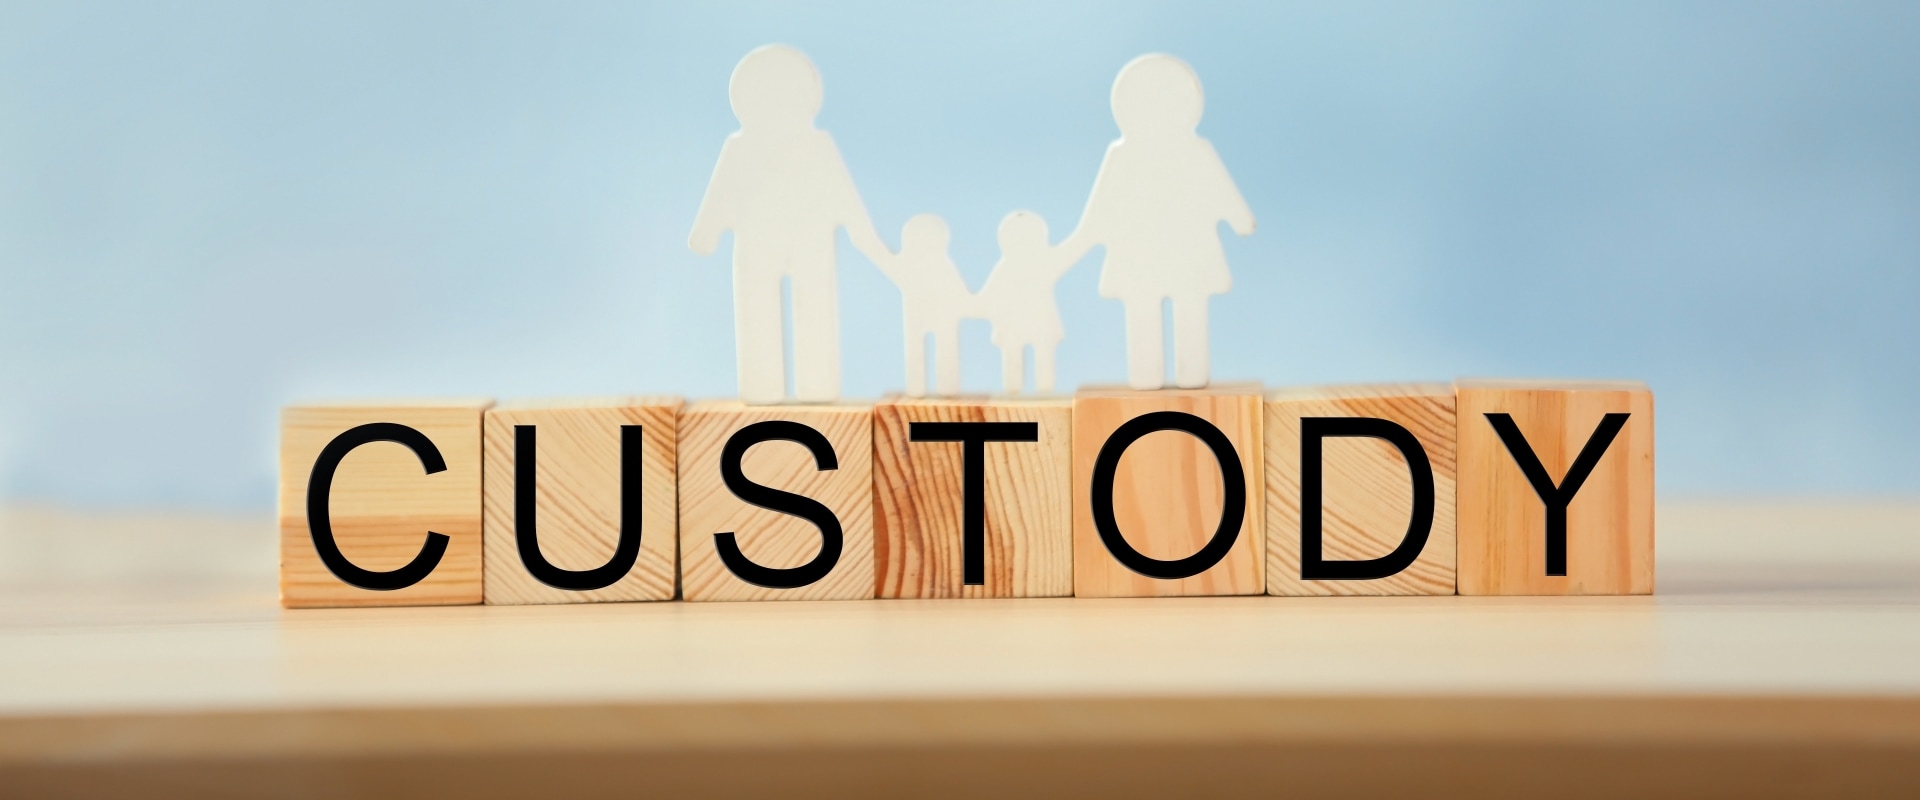 What is the law in florida for child custody?